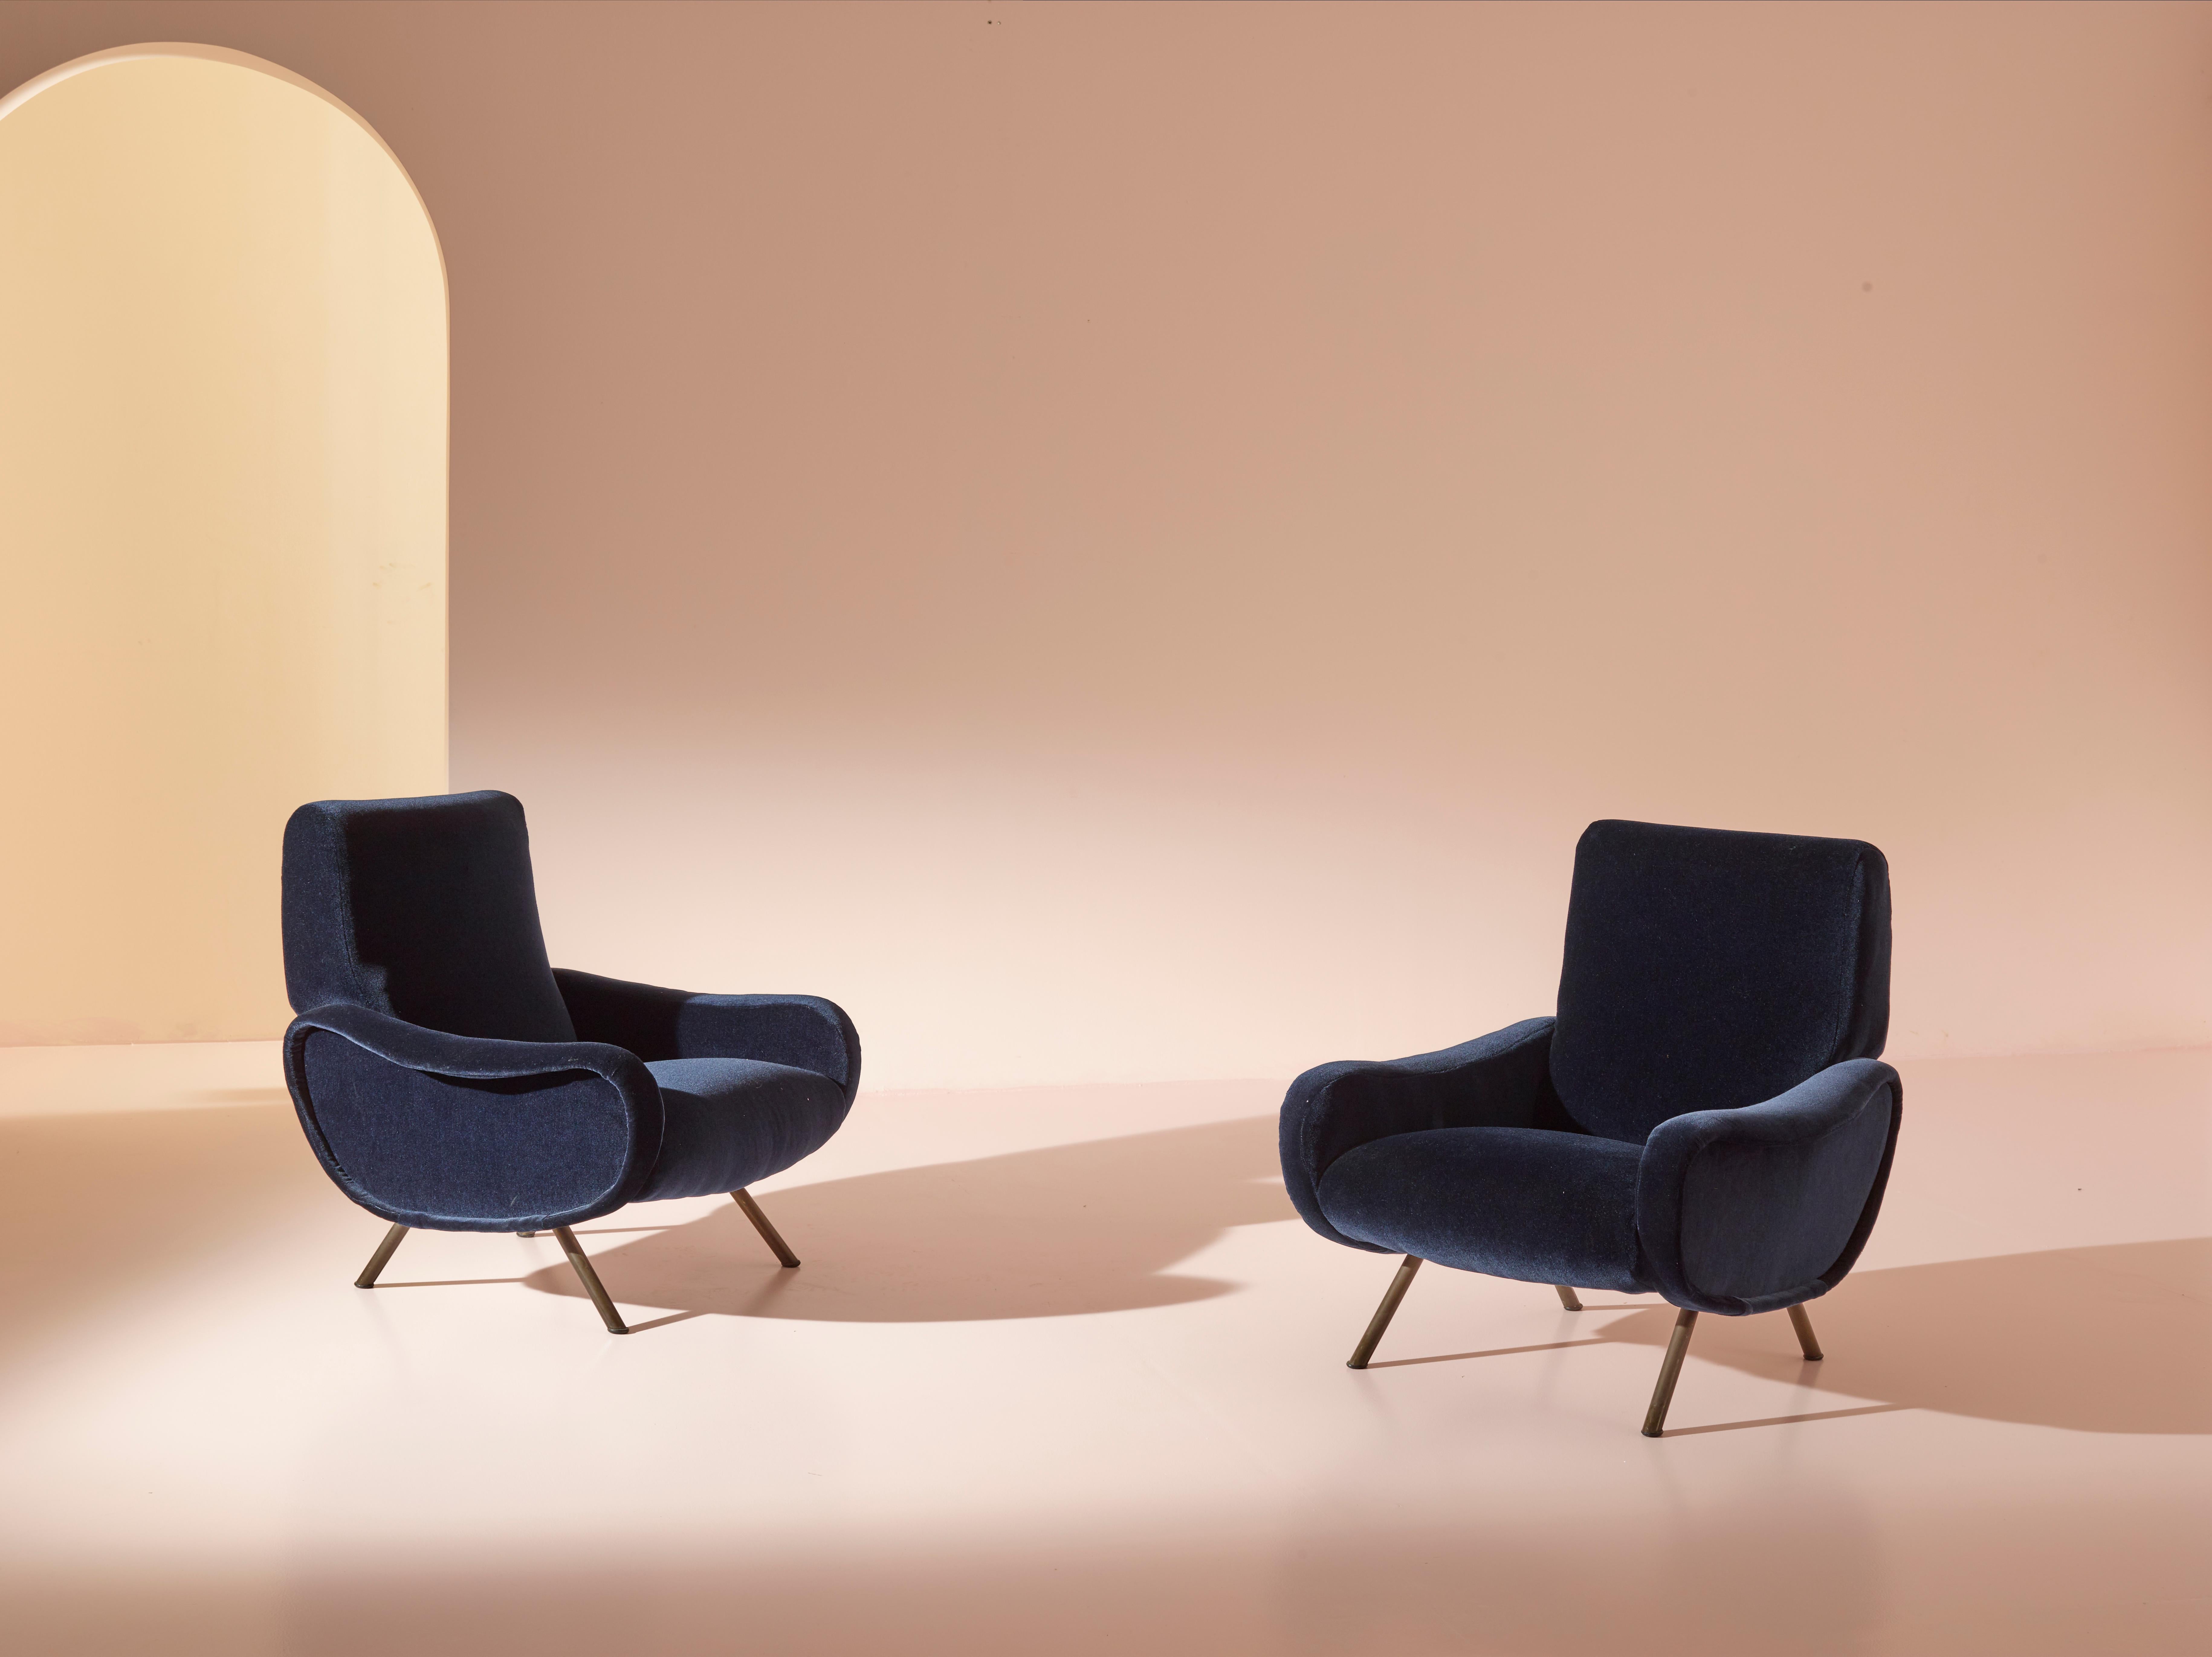 An exquisite pair of Lady lounge chairs, originally designed by the renowned Marco Zanuso for Arflex, Italy in 1951. These remarkable chairs have undergone meticulous reupholstering, now showcasing an elegant dark blue cotton velvet fabric. The Lady